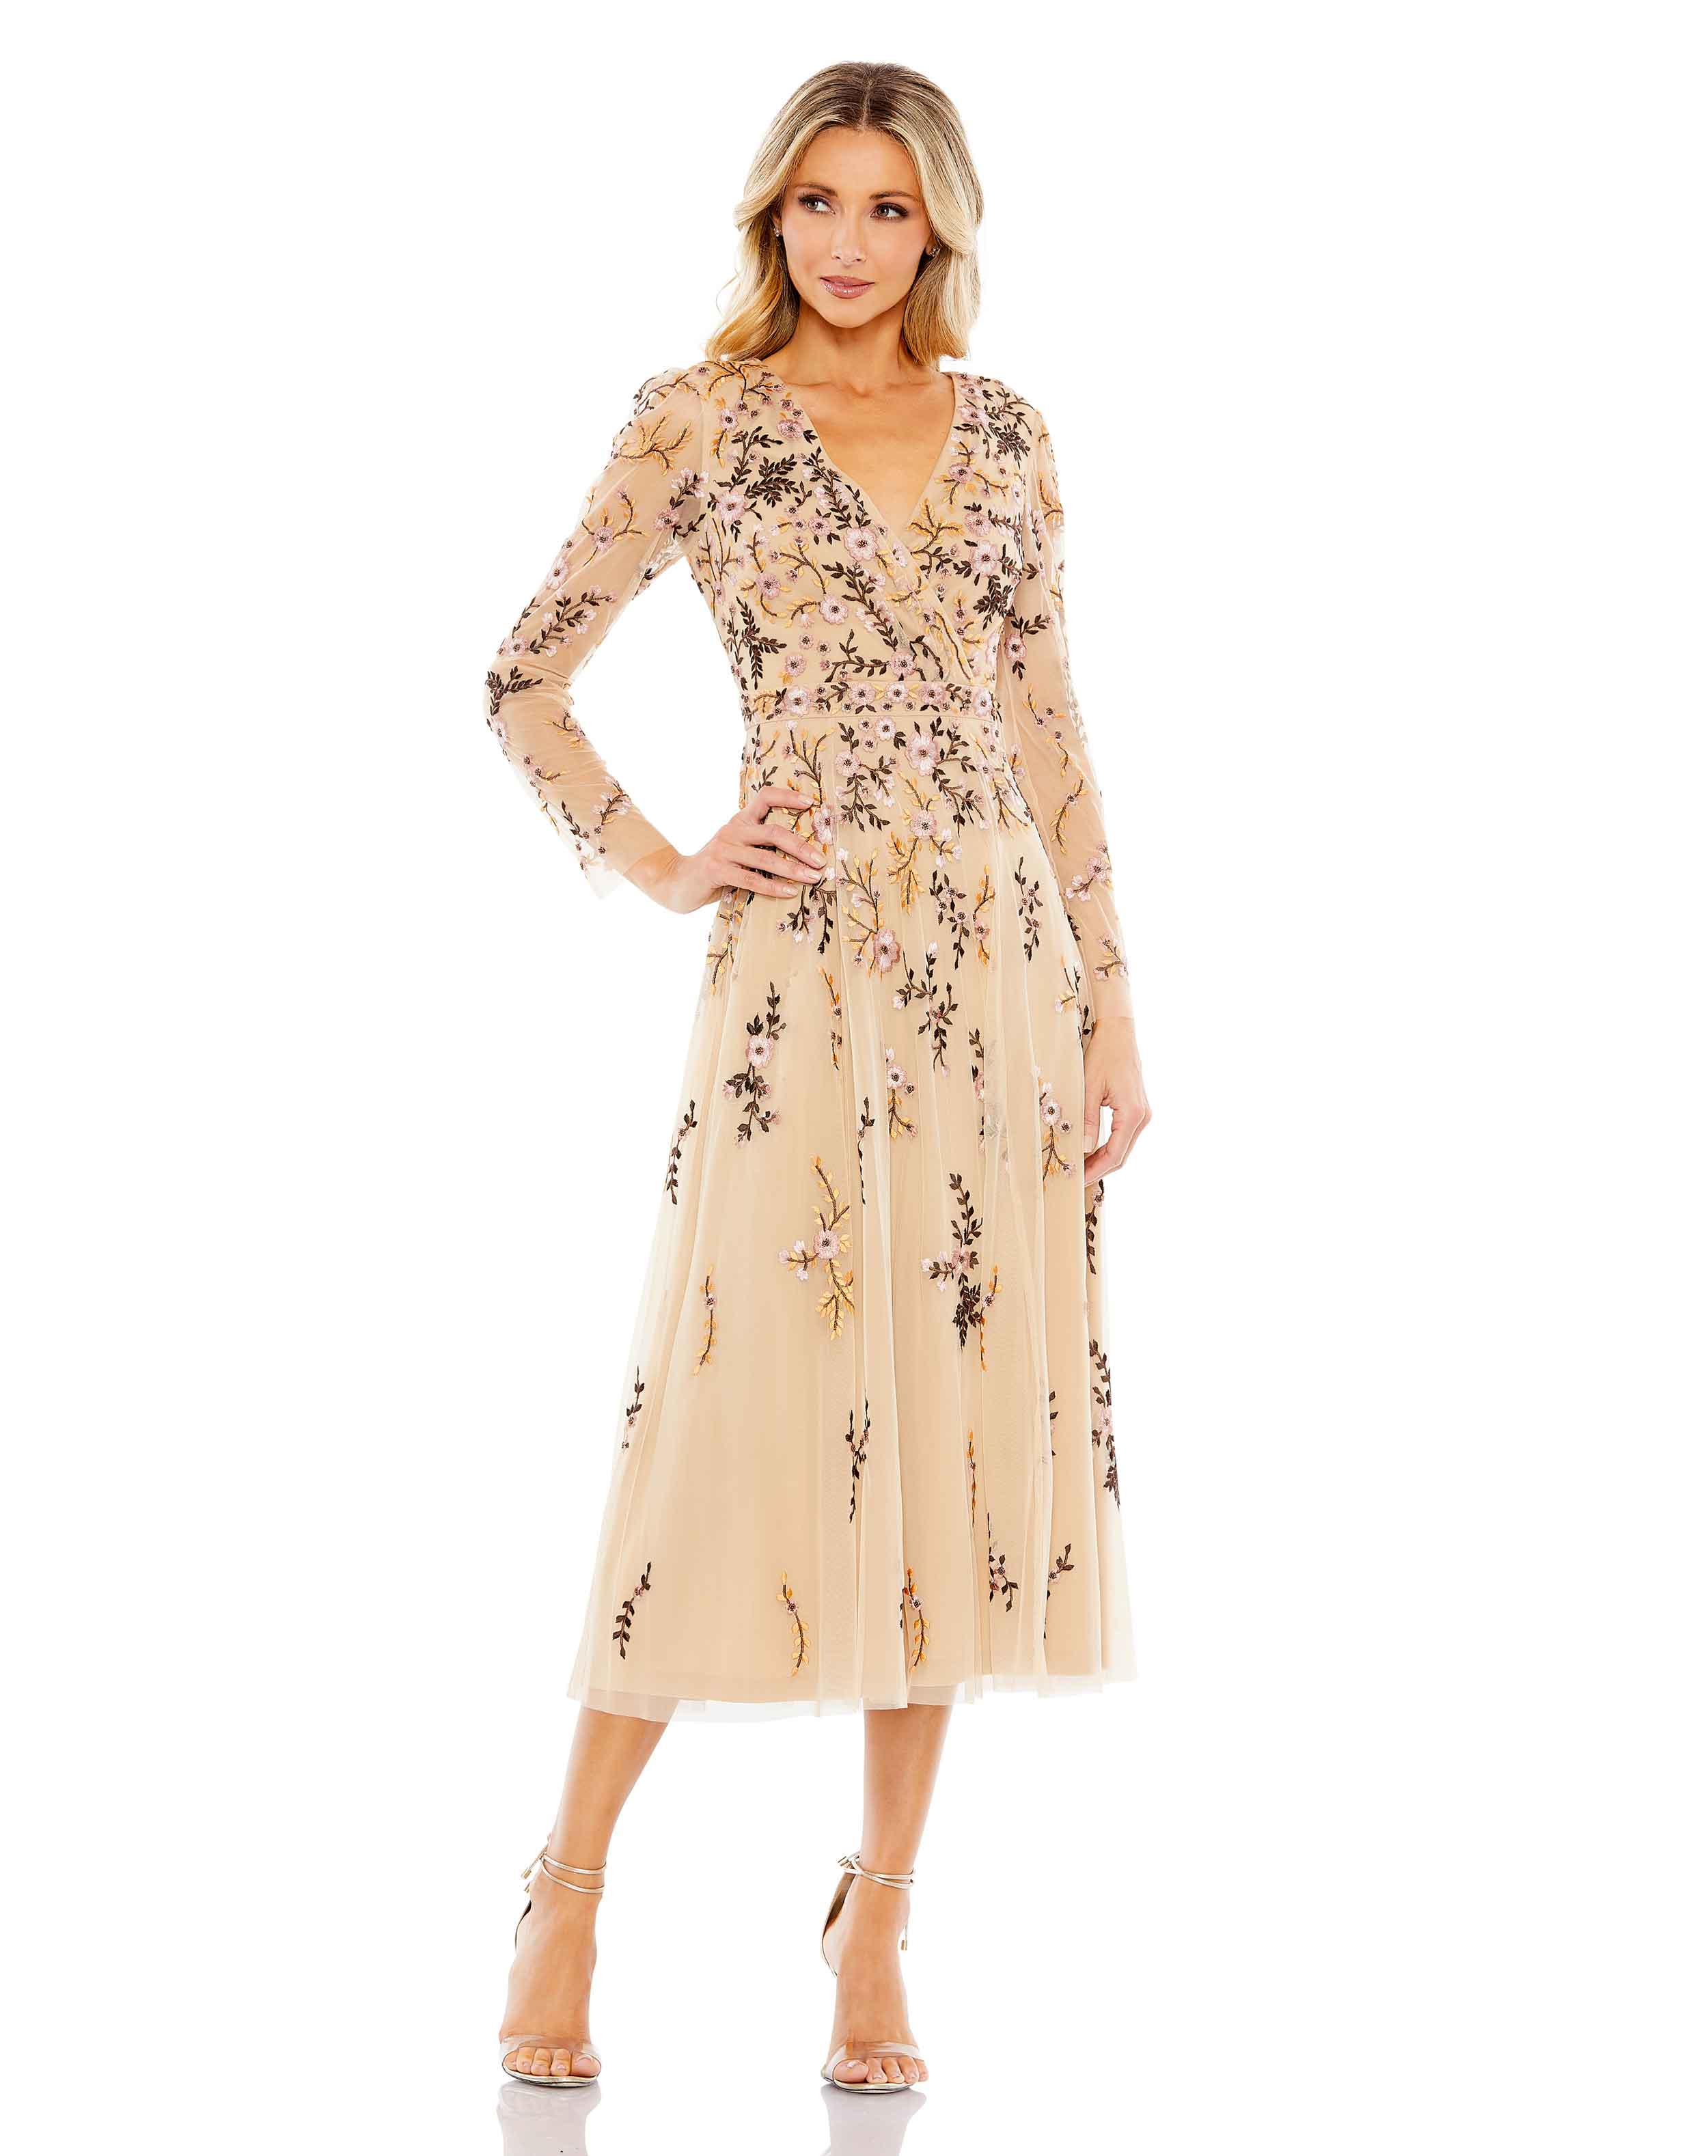 Floral Embroidered A-Line Cocktail Dress